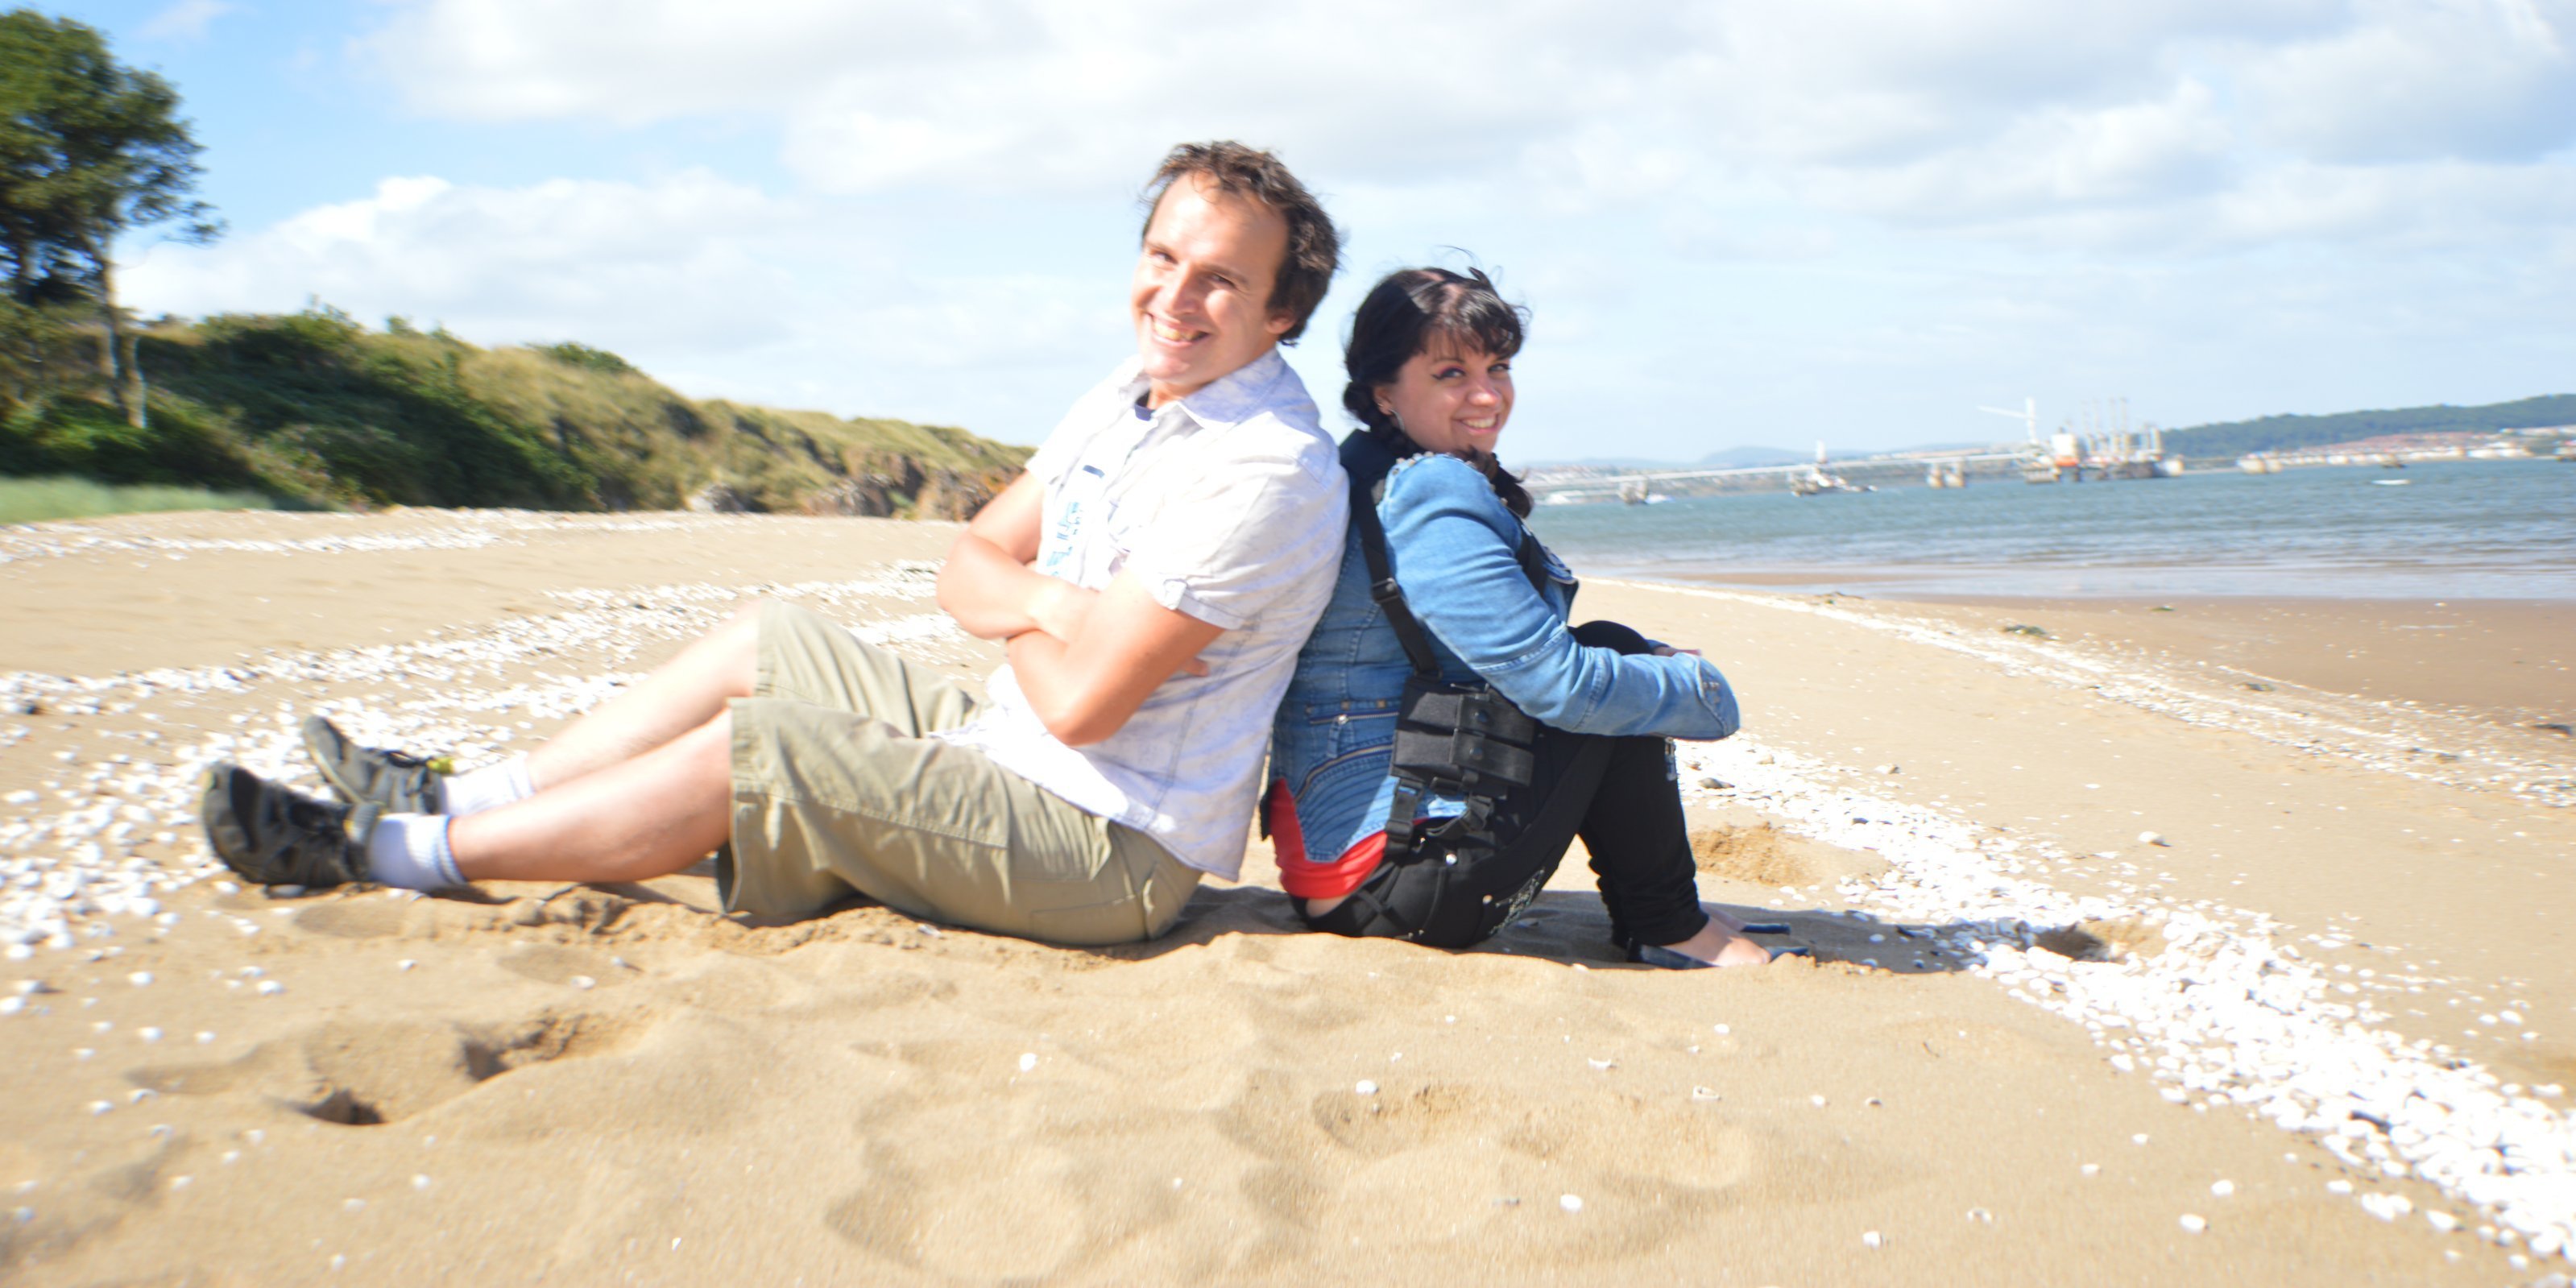 Shawn Watson and Michelle Samantha Roberts pose for a photo on Hound Point Beach.